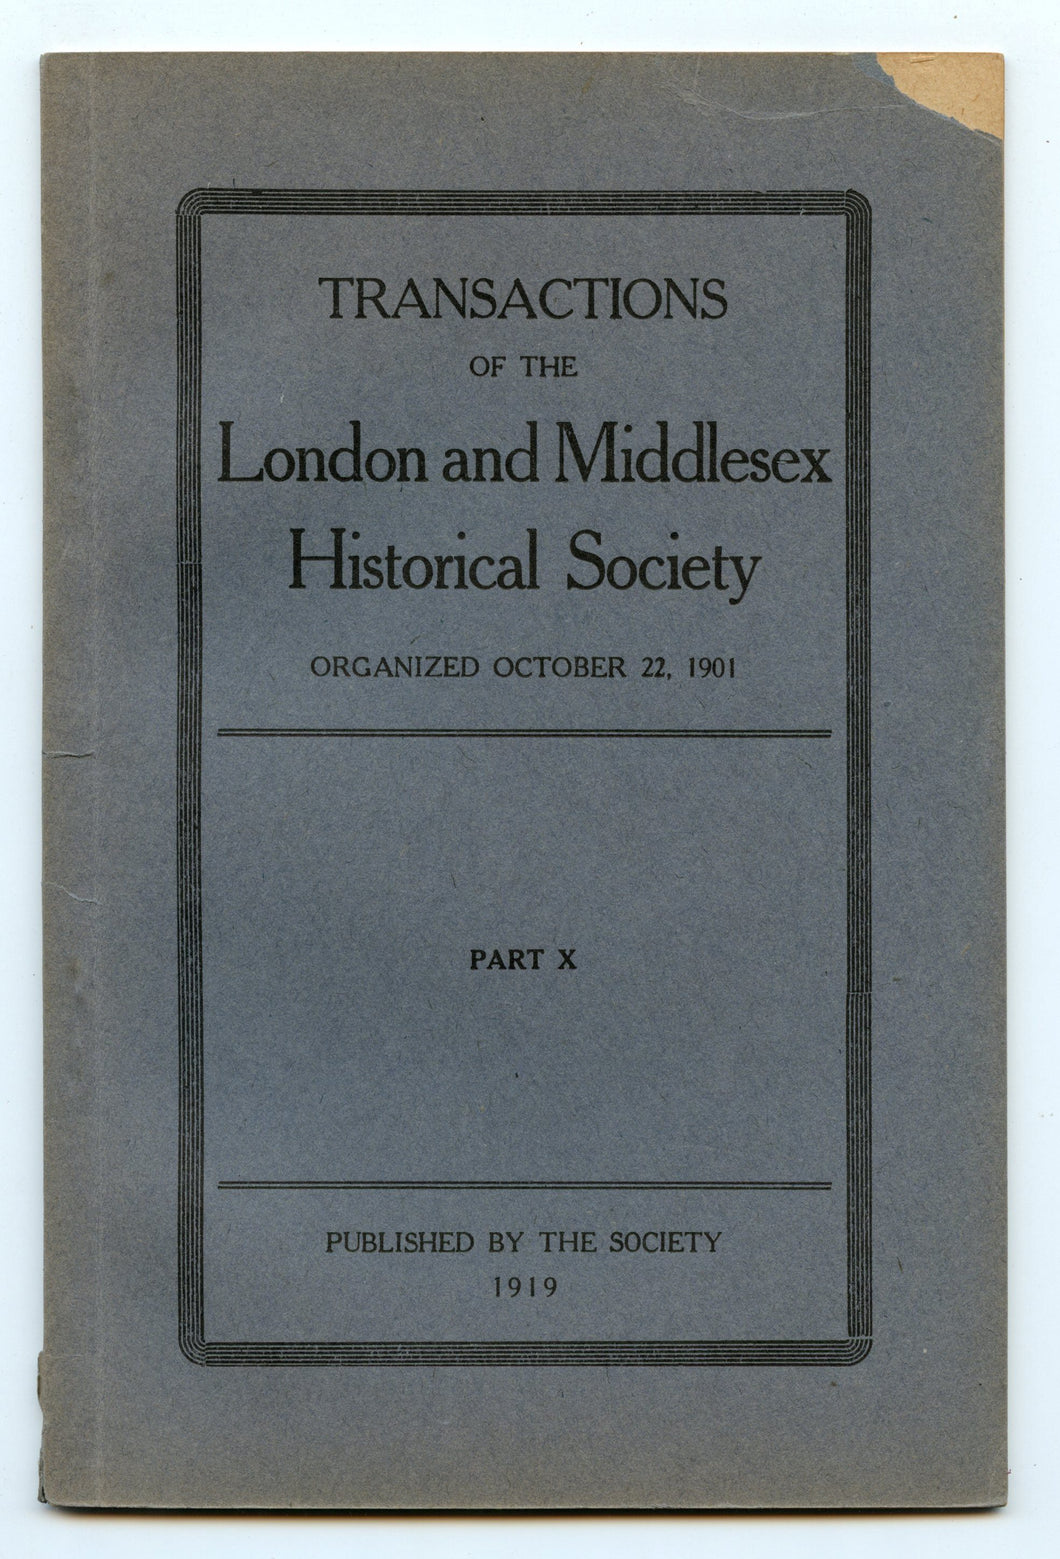 Transactions of the London and Middlesex Historical Society Part X 1919